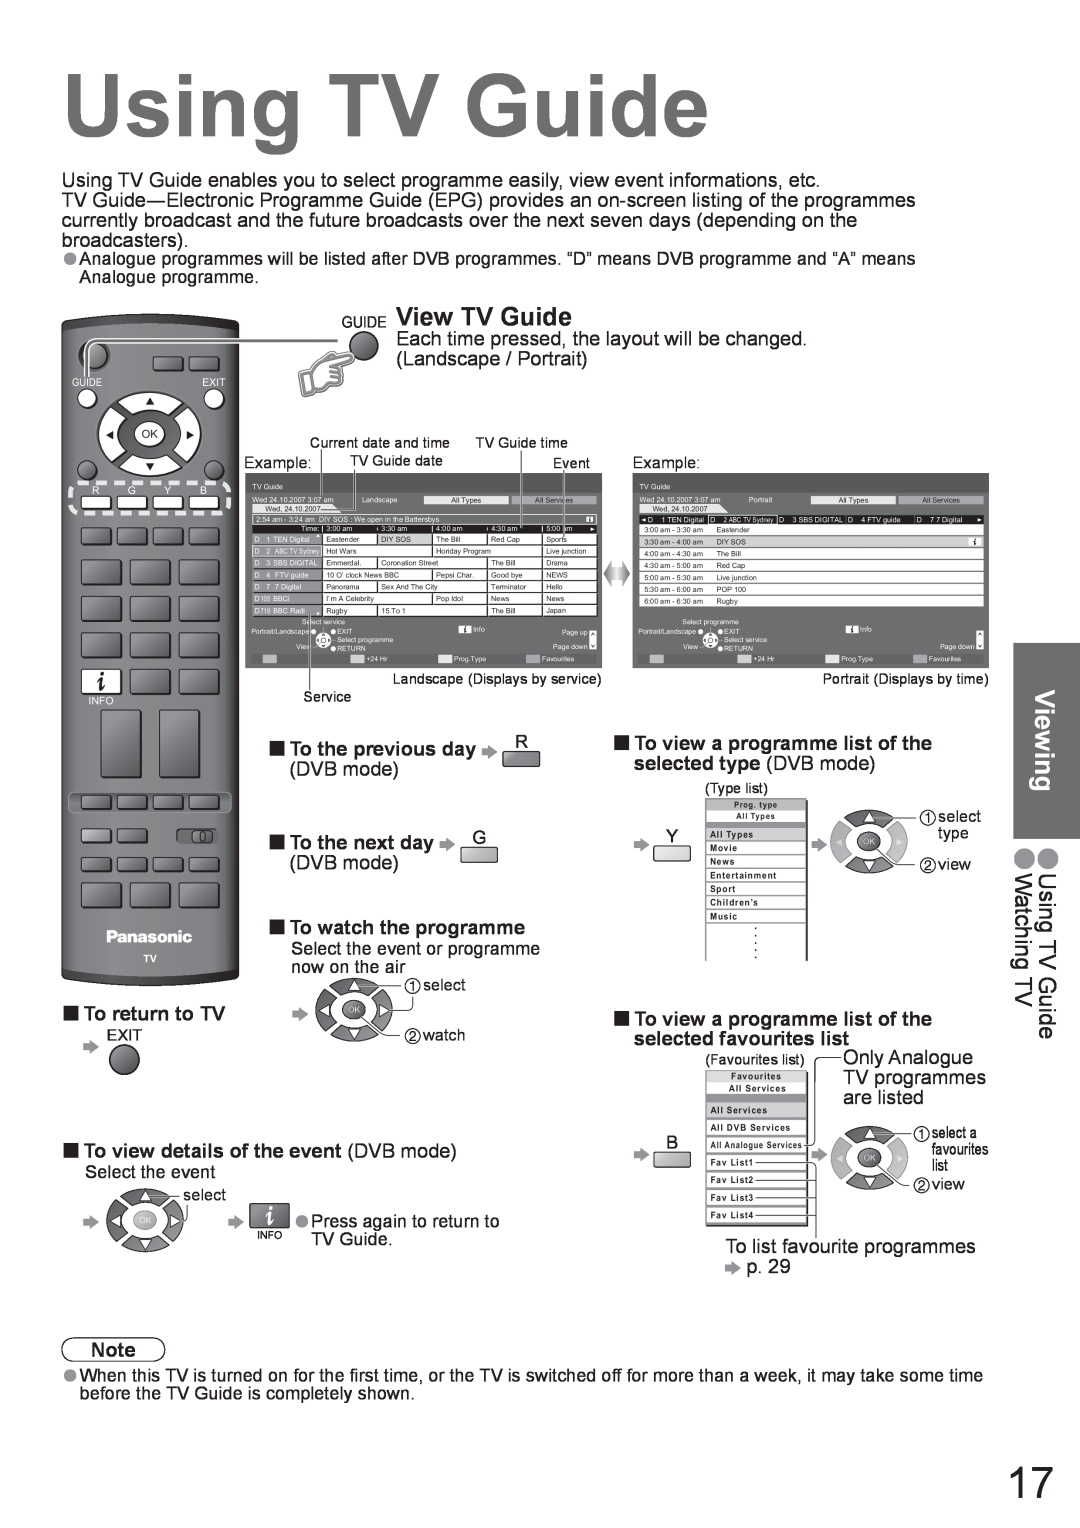 Panasonic TH-42PX8A manual Viewing, GUIDE View TV Guide, Using TV Guide Watching TV, Landscape / Portrait, DVB mode 